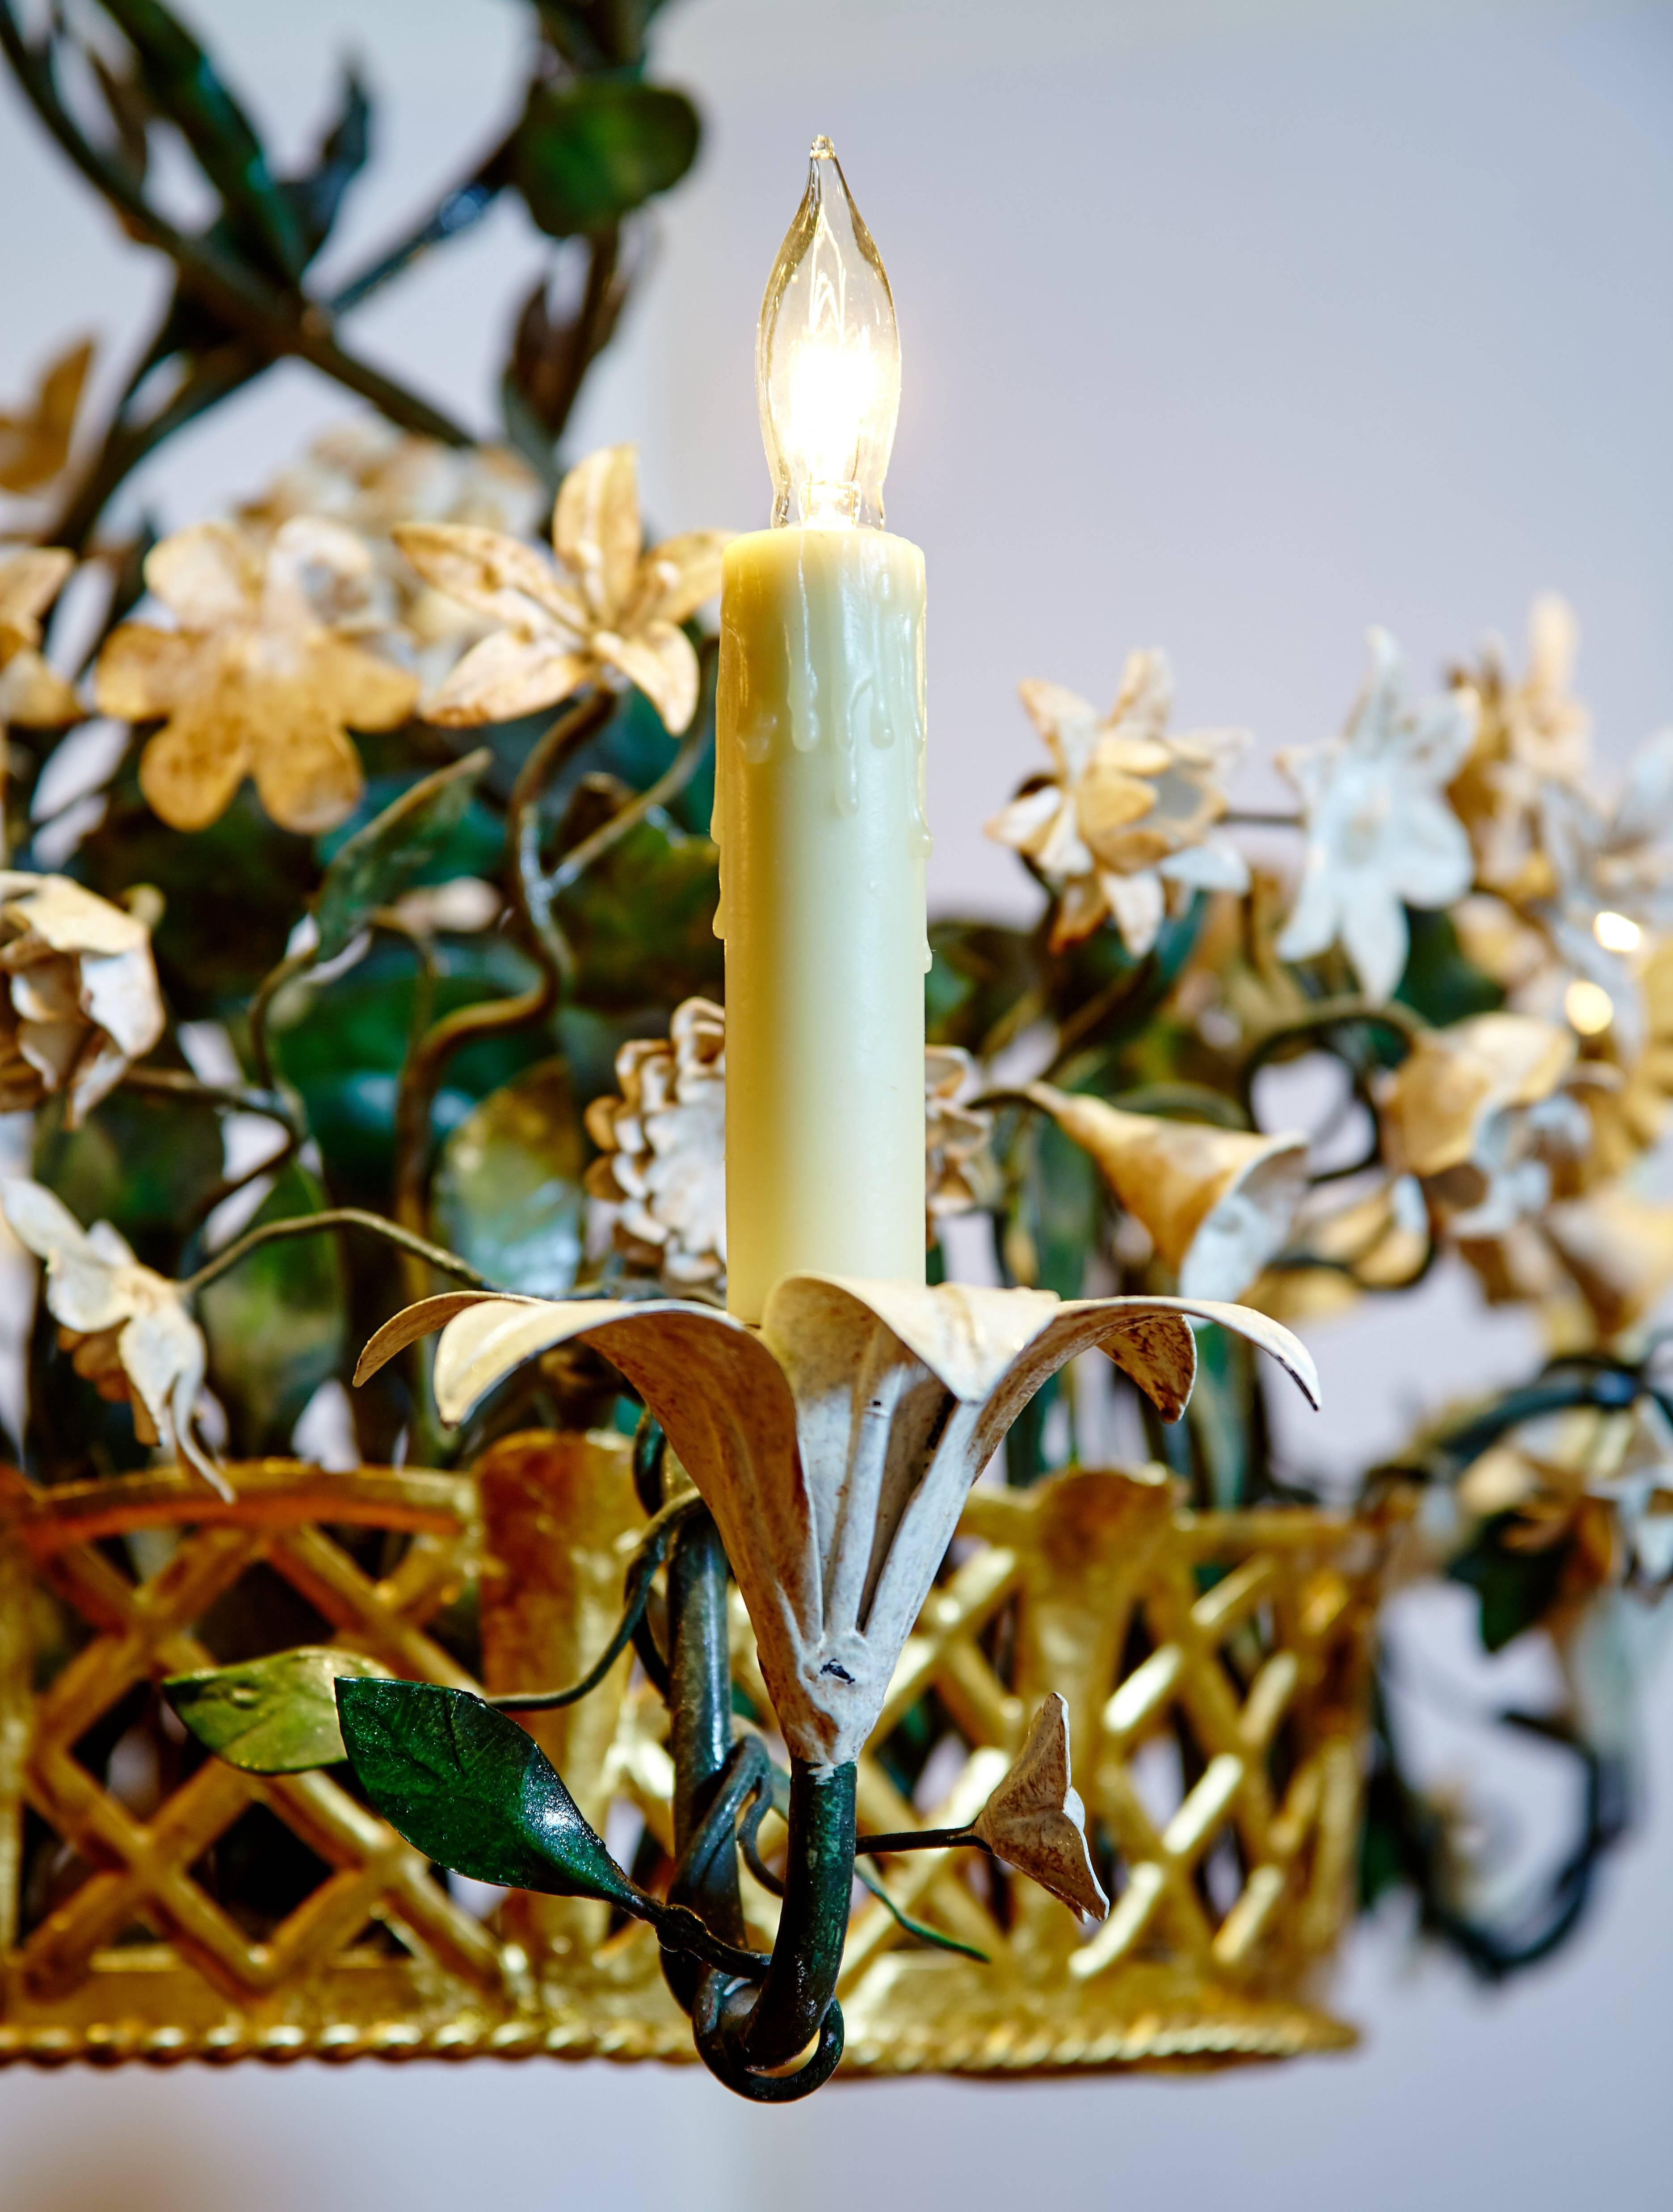 Elegant tole chandelier with antiqued white metal flowers and antiqued green foliage in a reticulated gilt metal basket. Six antiqued white lilies serve as candleholders that are wired for electricity.